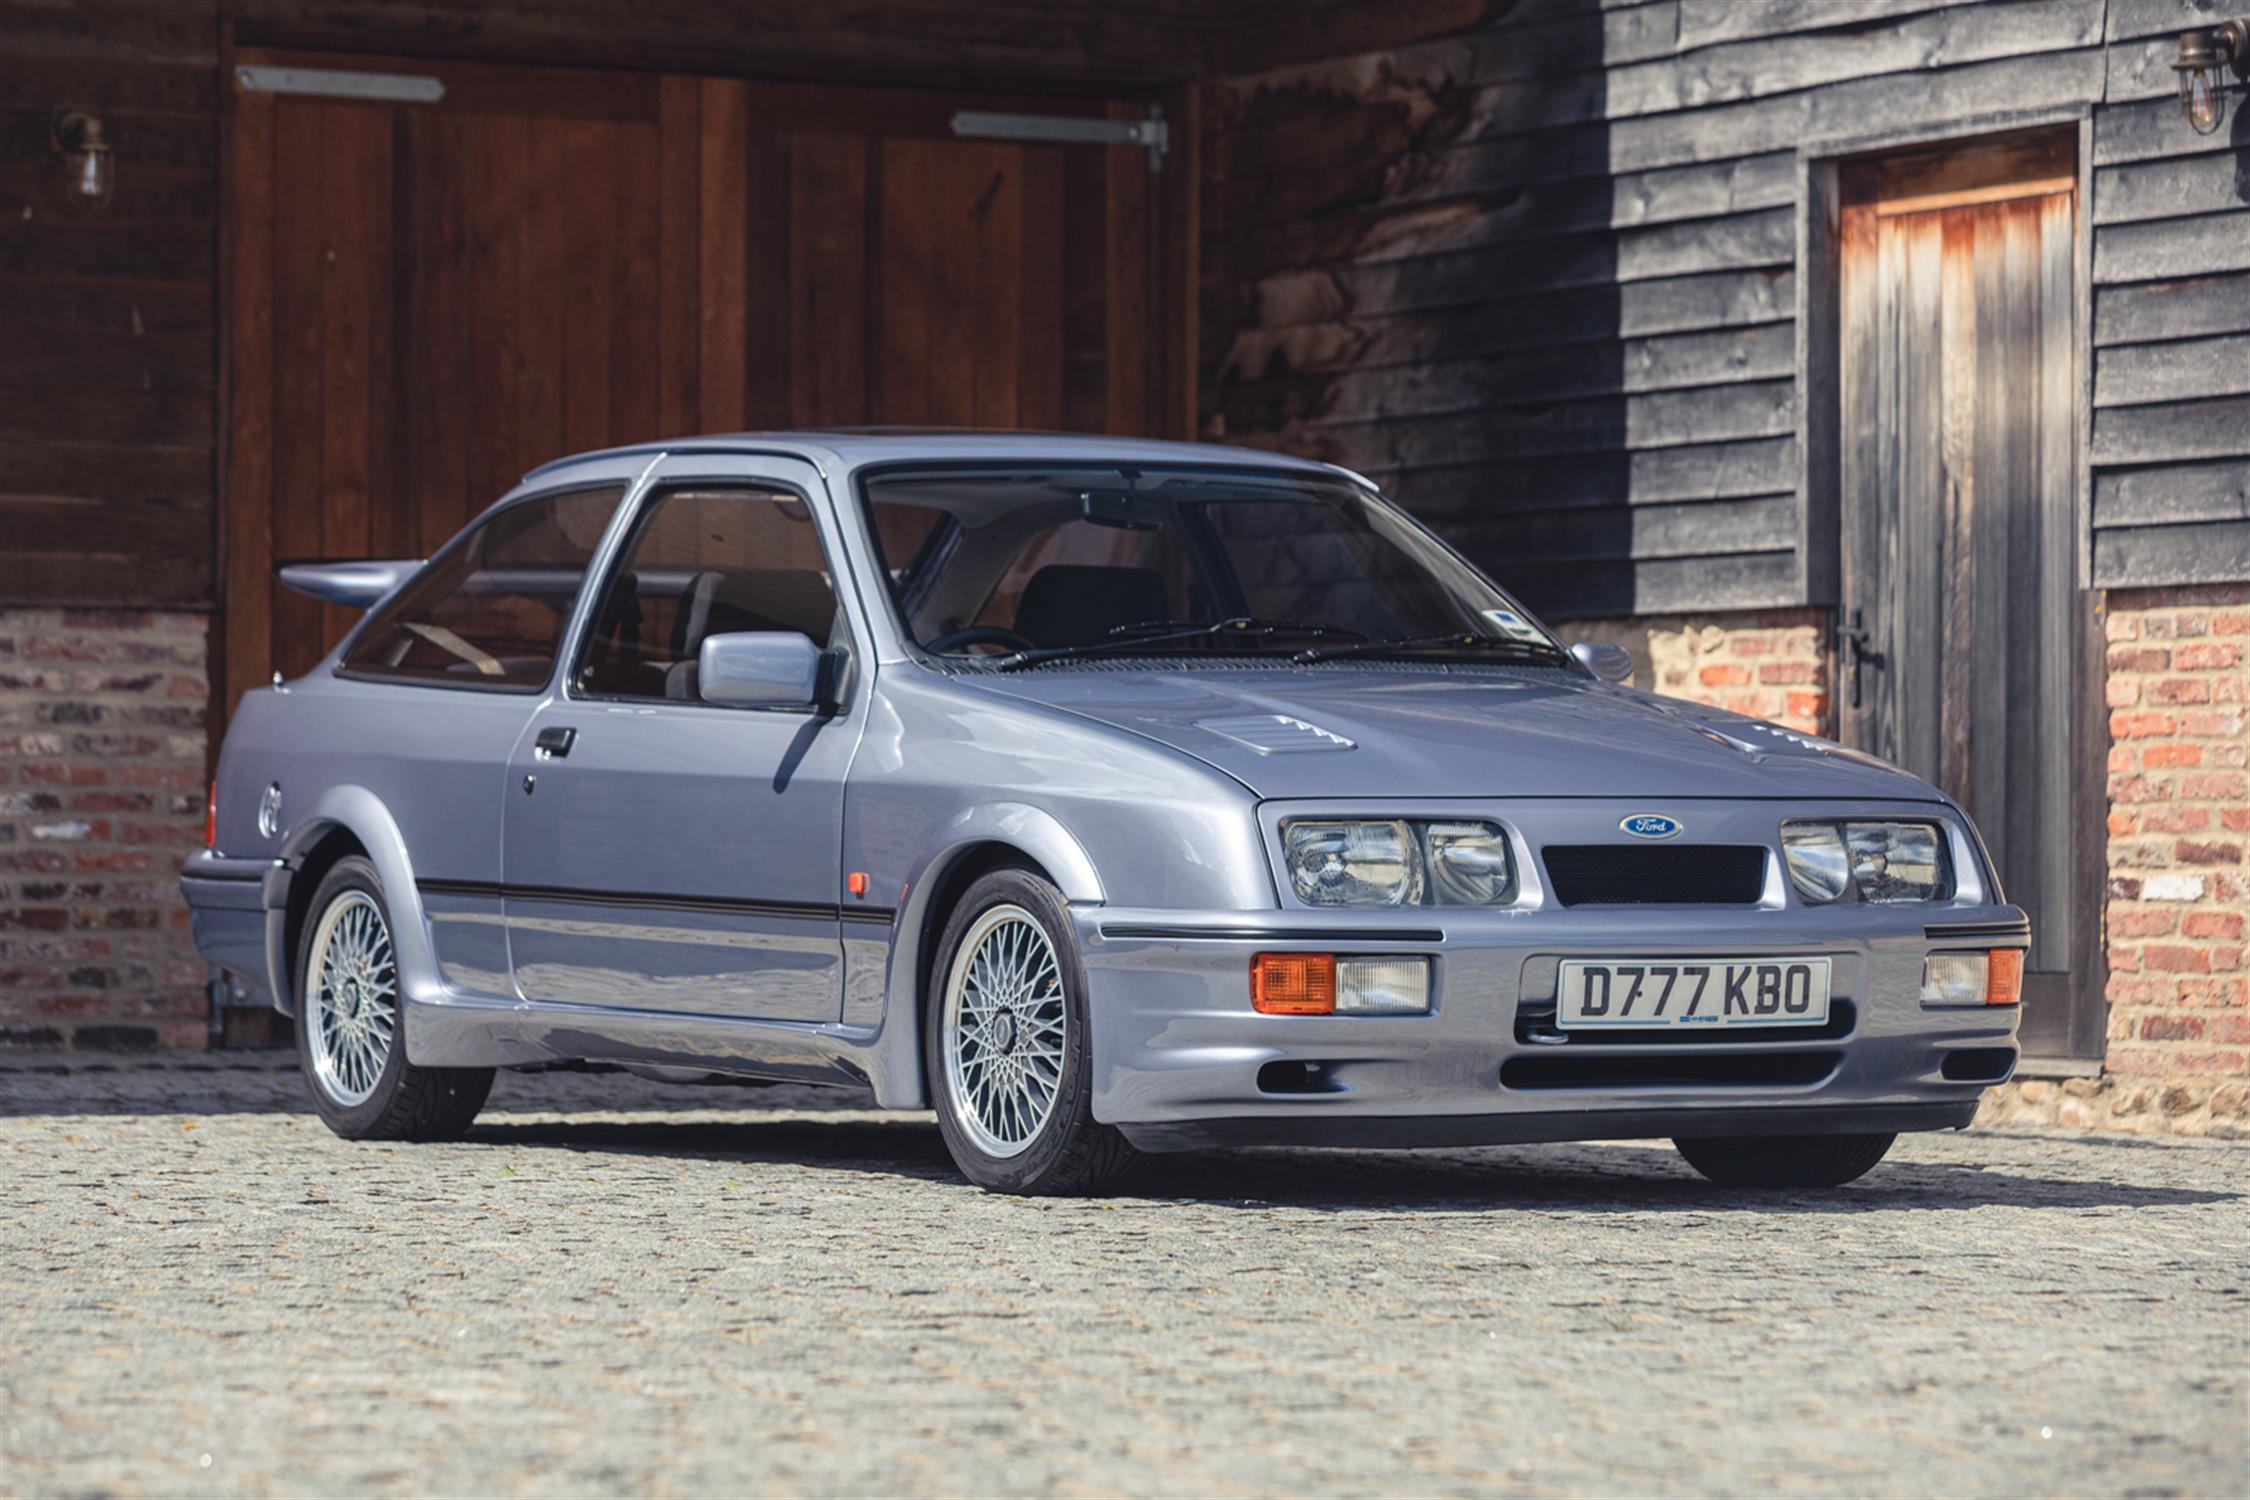 1986 Ford Sierra RS Cosworth - Image 2 of 3